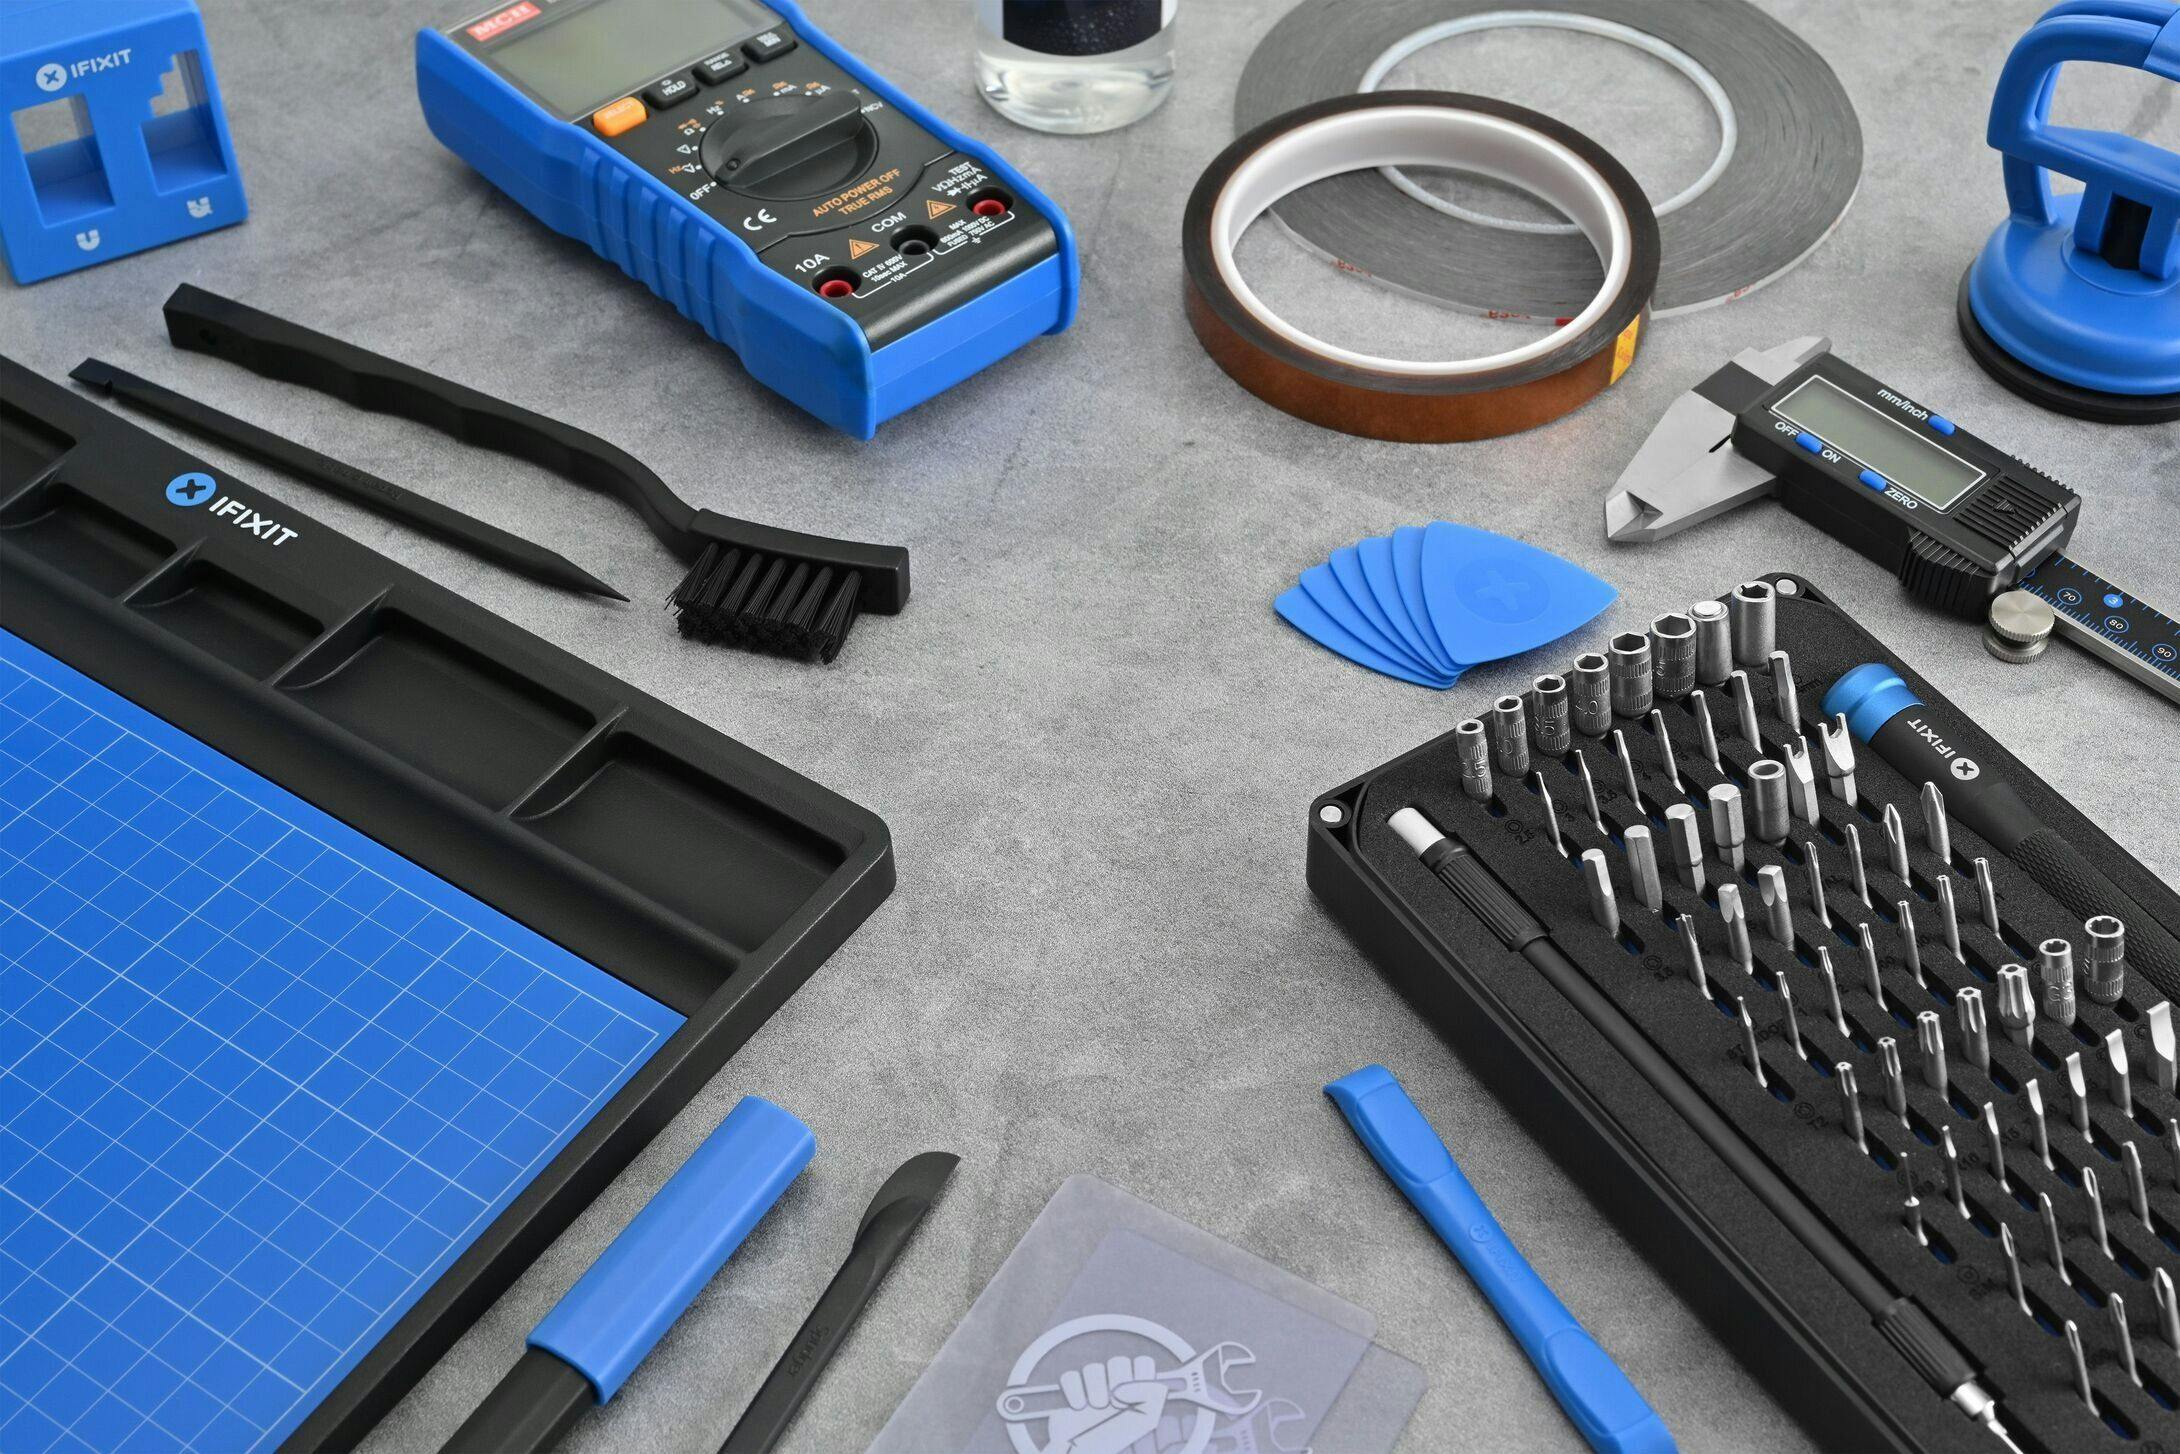 Dismantle Any Smartphone With This Handy iFixit Kit